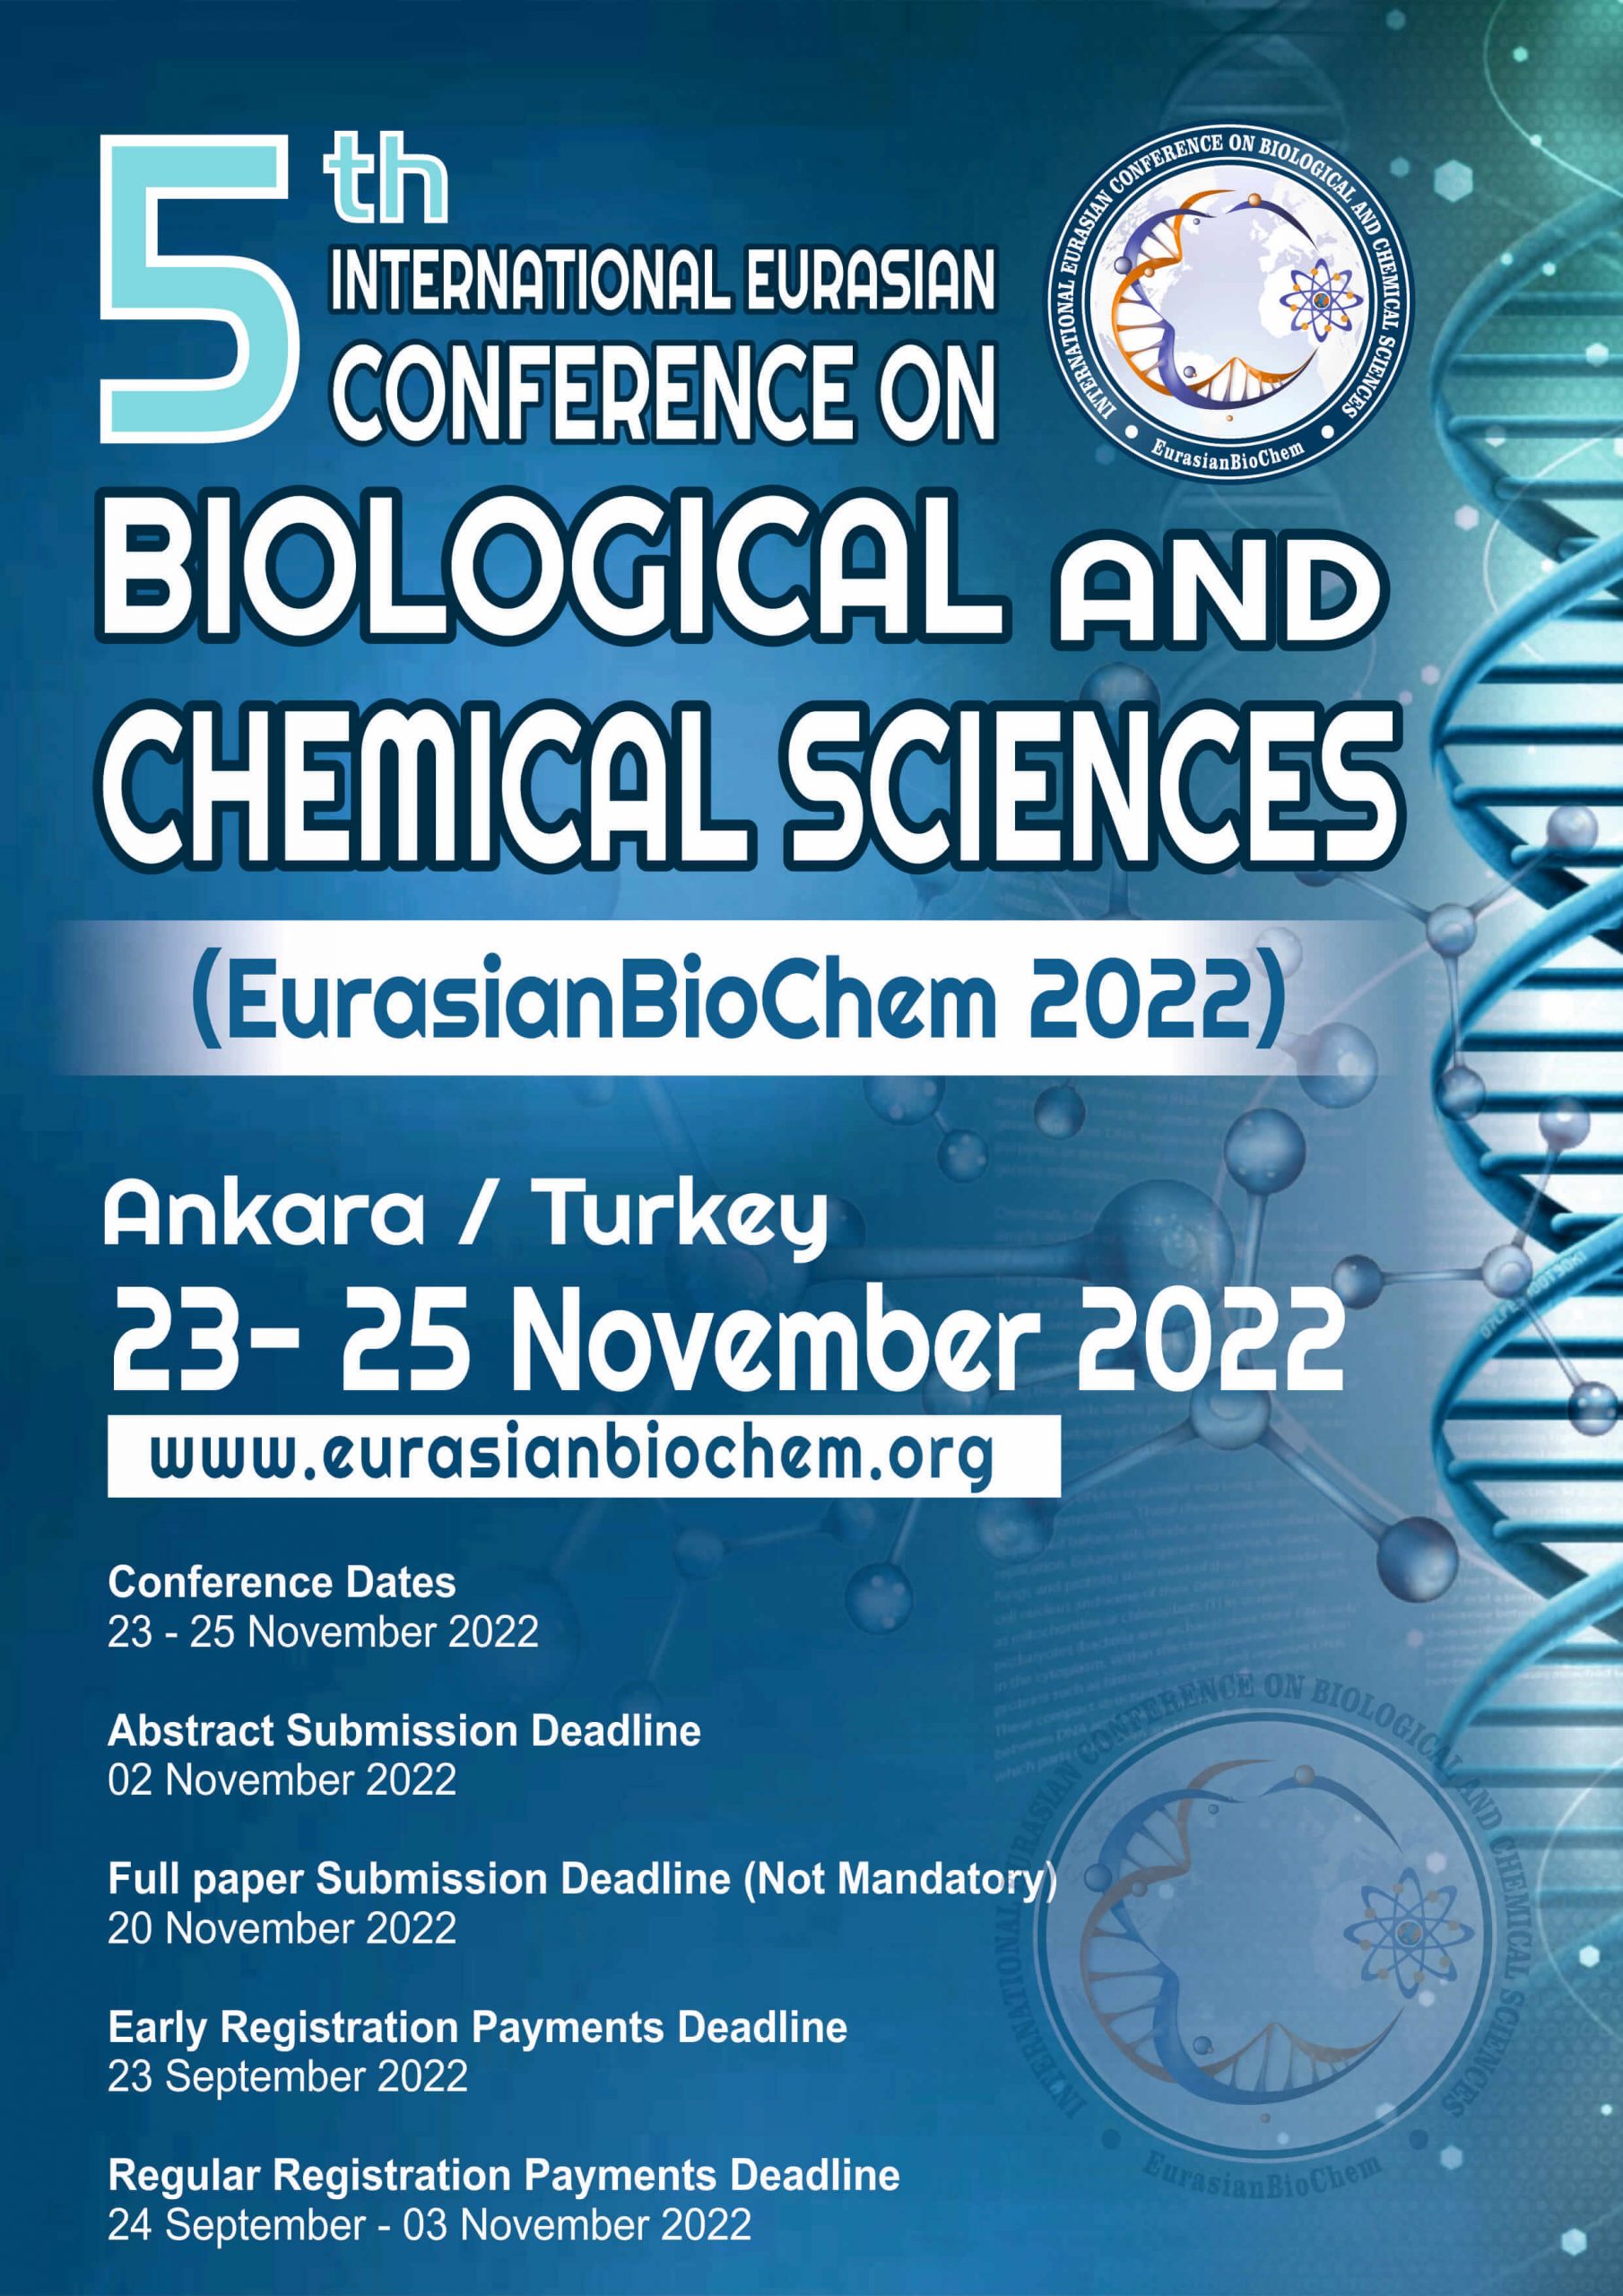 5th International Eurasian Conference on Biological and Chemical Sciences (EurasianBioChem 2022)